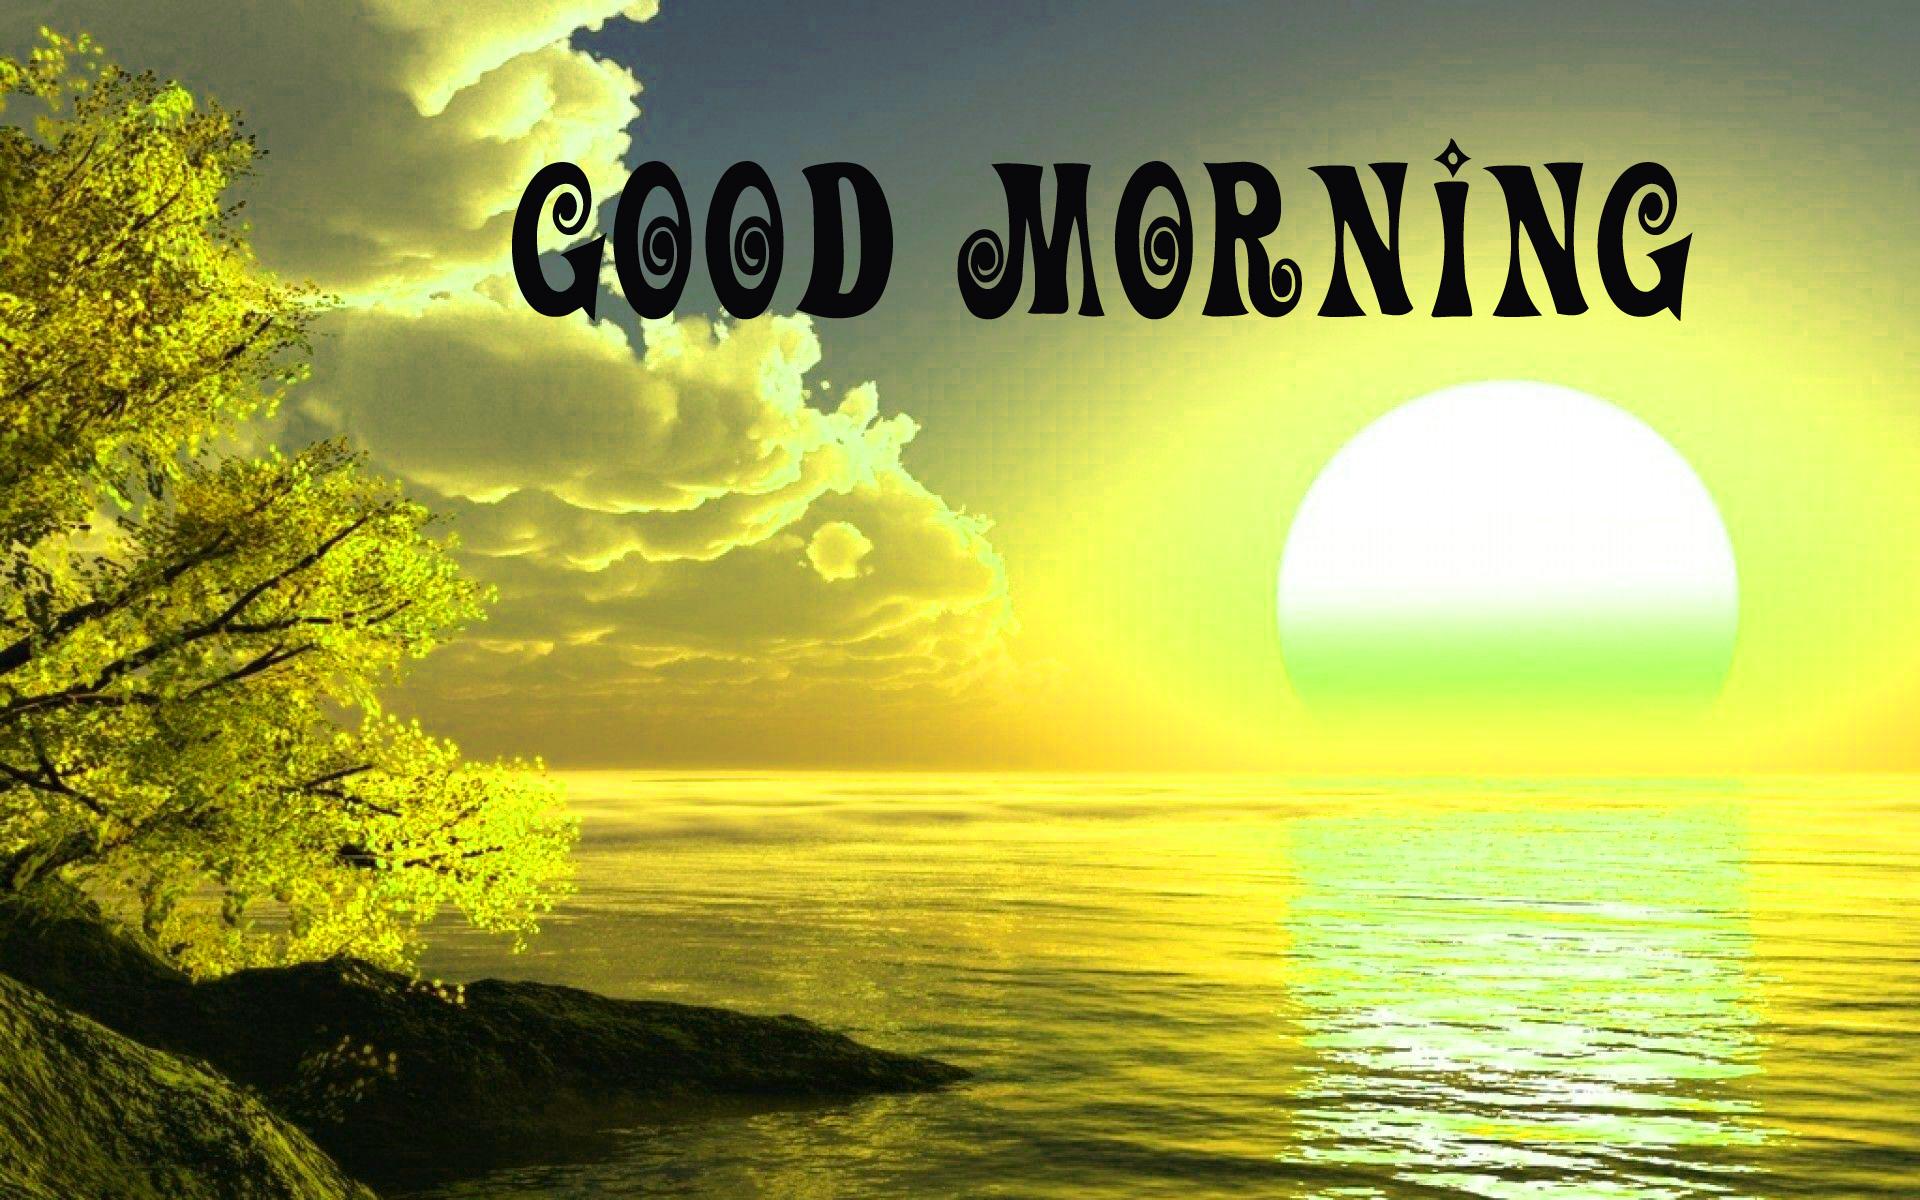 175+ good morning sunrise picture Image Wallpapers Photo HD For Whatsapp